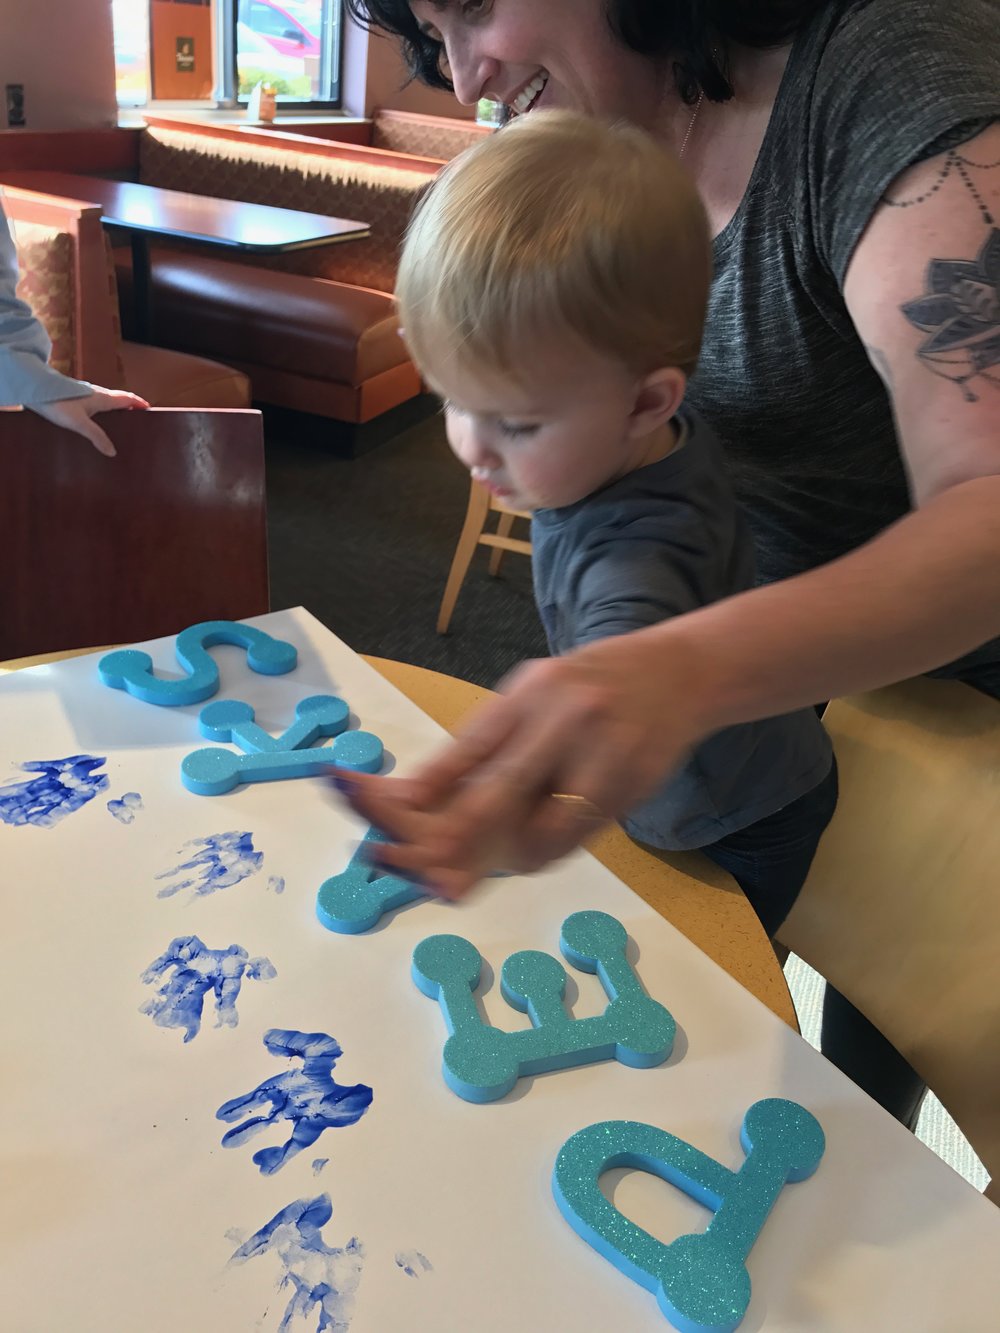   Lending her hands to Autism Speaks at Panera in Columbus, OH  